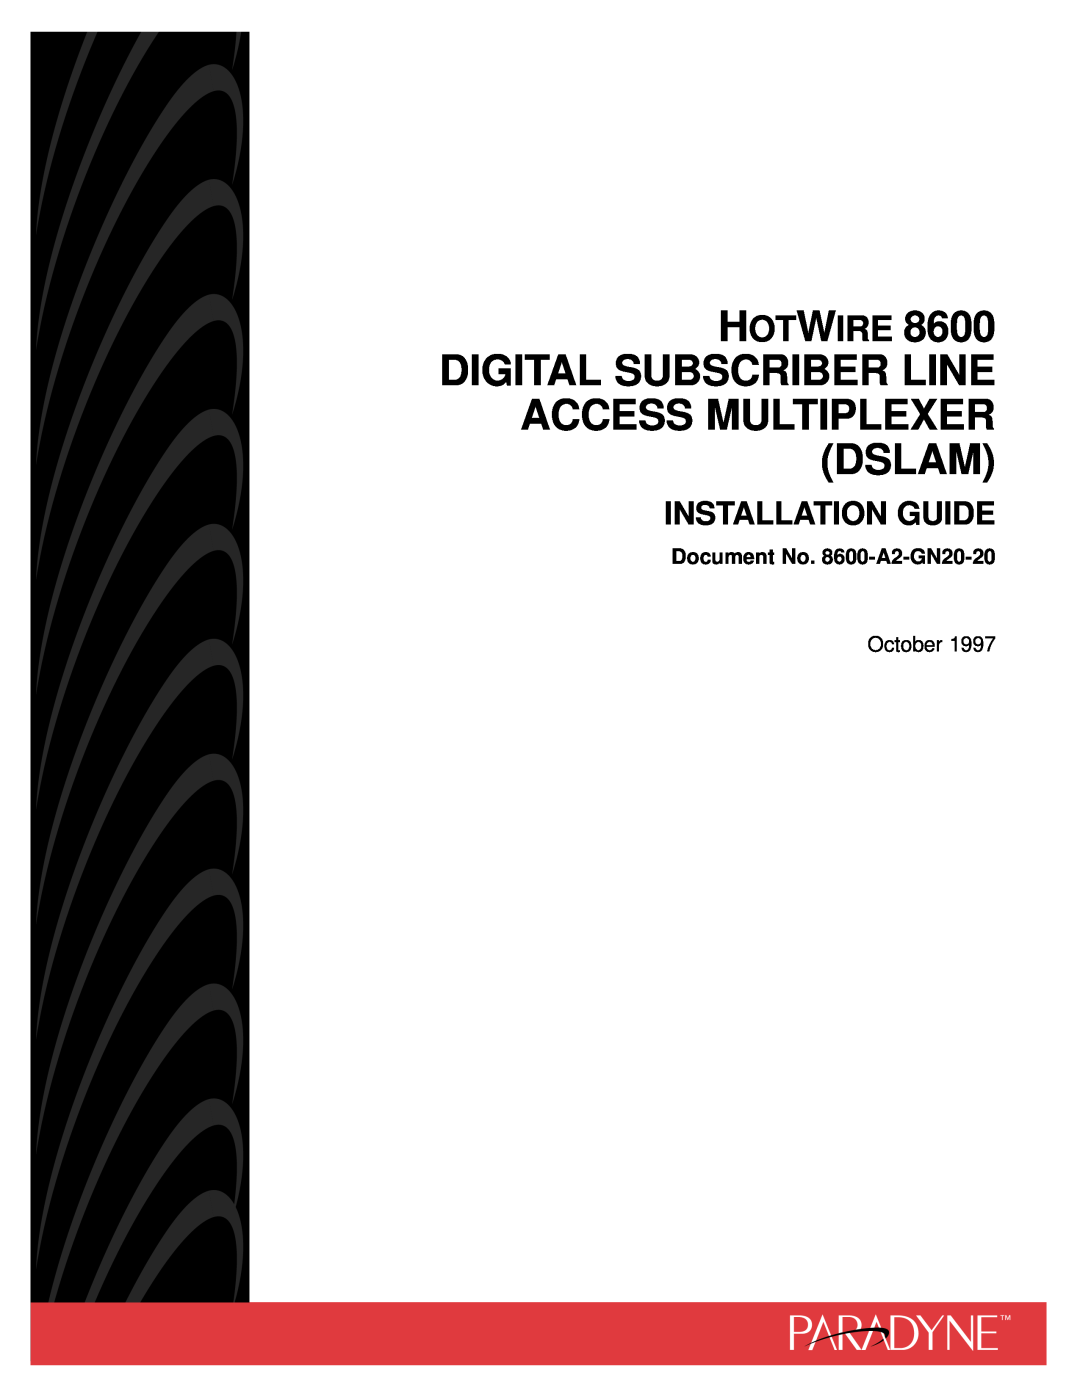 Nortel Networks manual HOTWIRE 8600 DIGITAL SUBSCRIBER LINE ACCESS MULTIPLEXER DSLAM, Installation Guide, October 